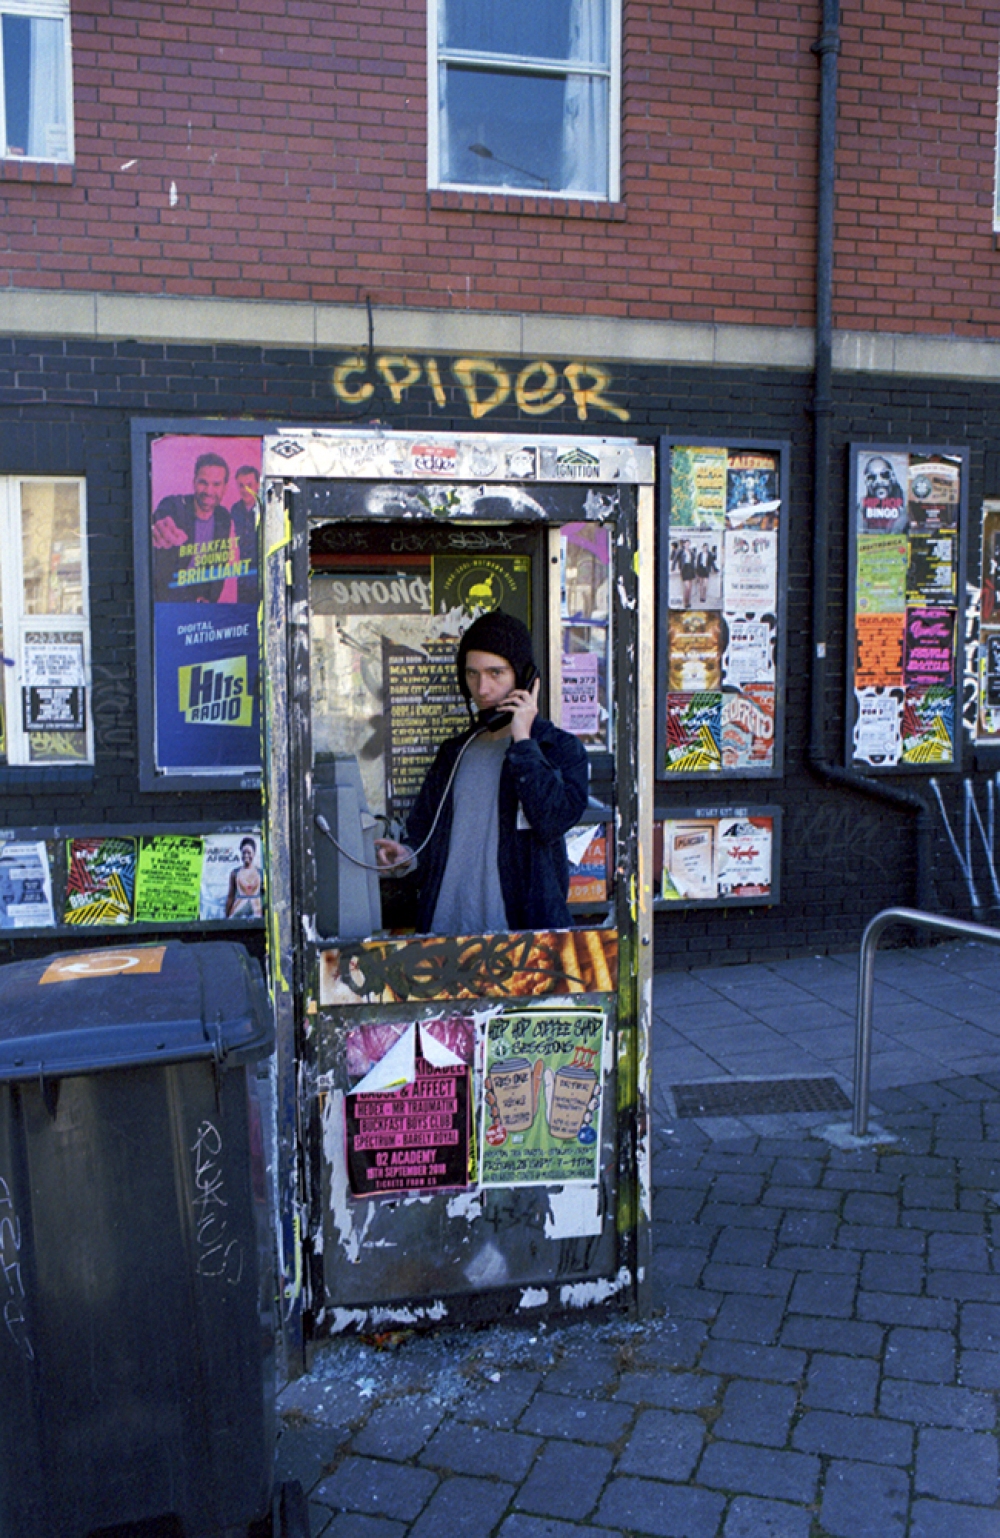 3. Phone booth